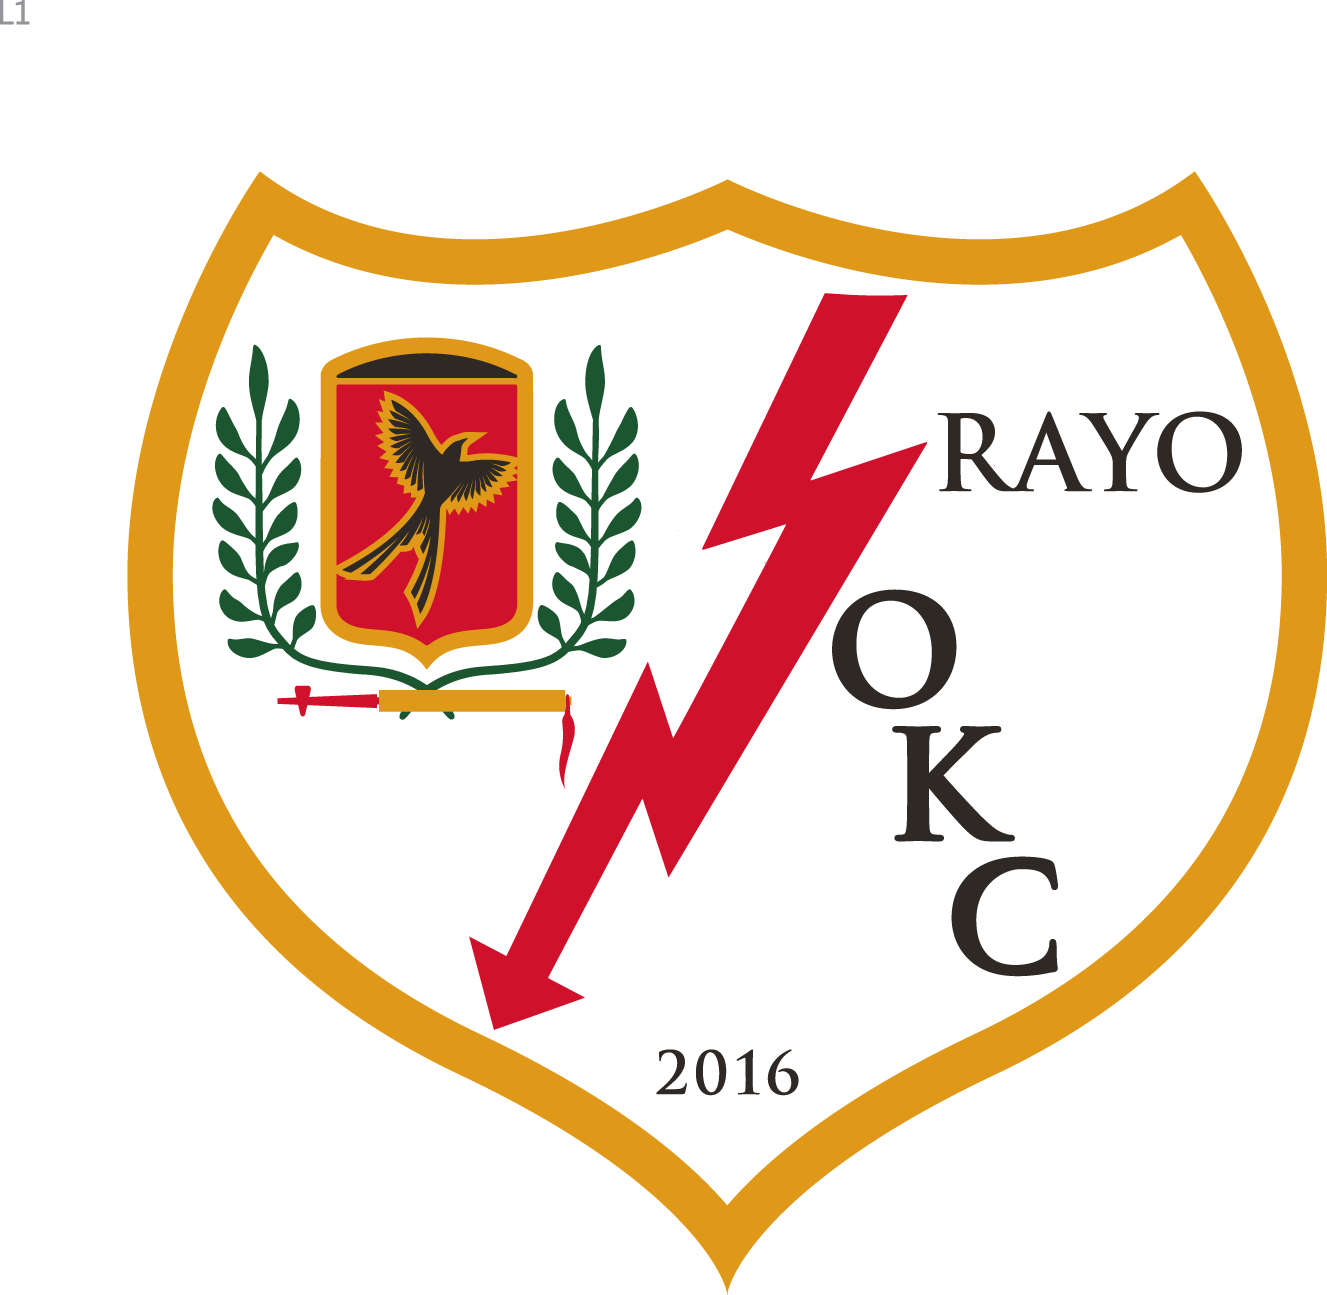 Finding A Central Time Zone Solution For Nasl's 2017 Rayo Vallecano